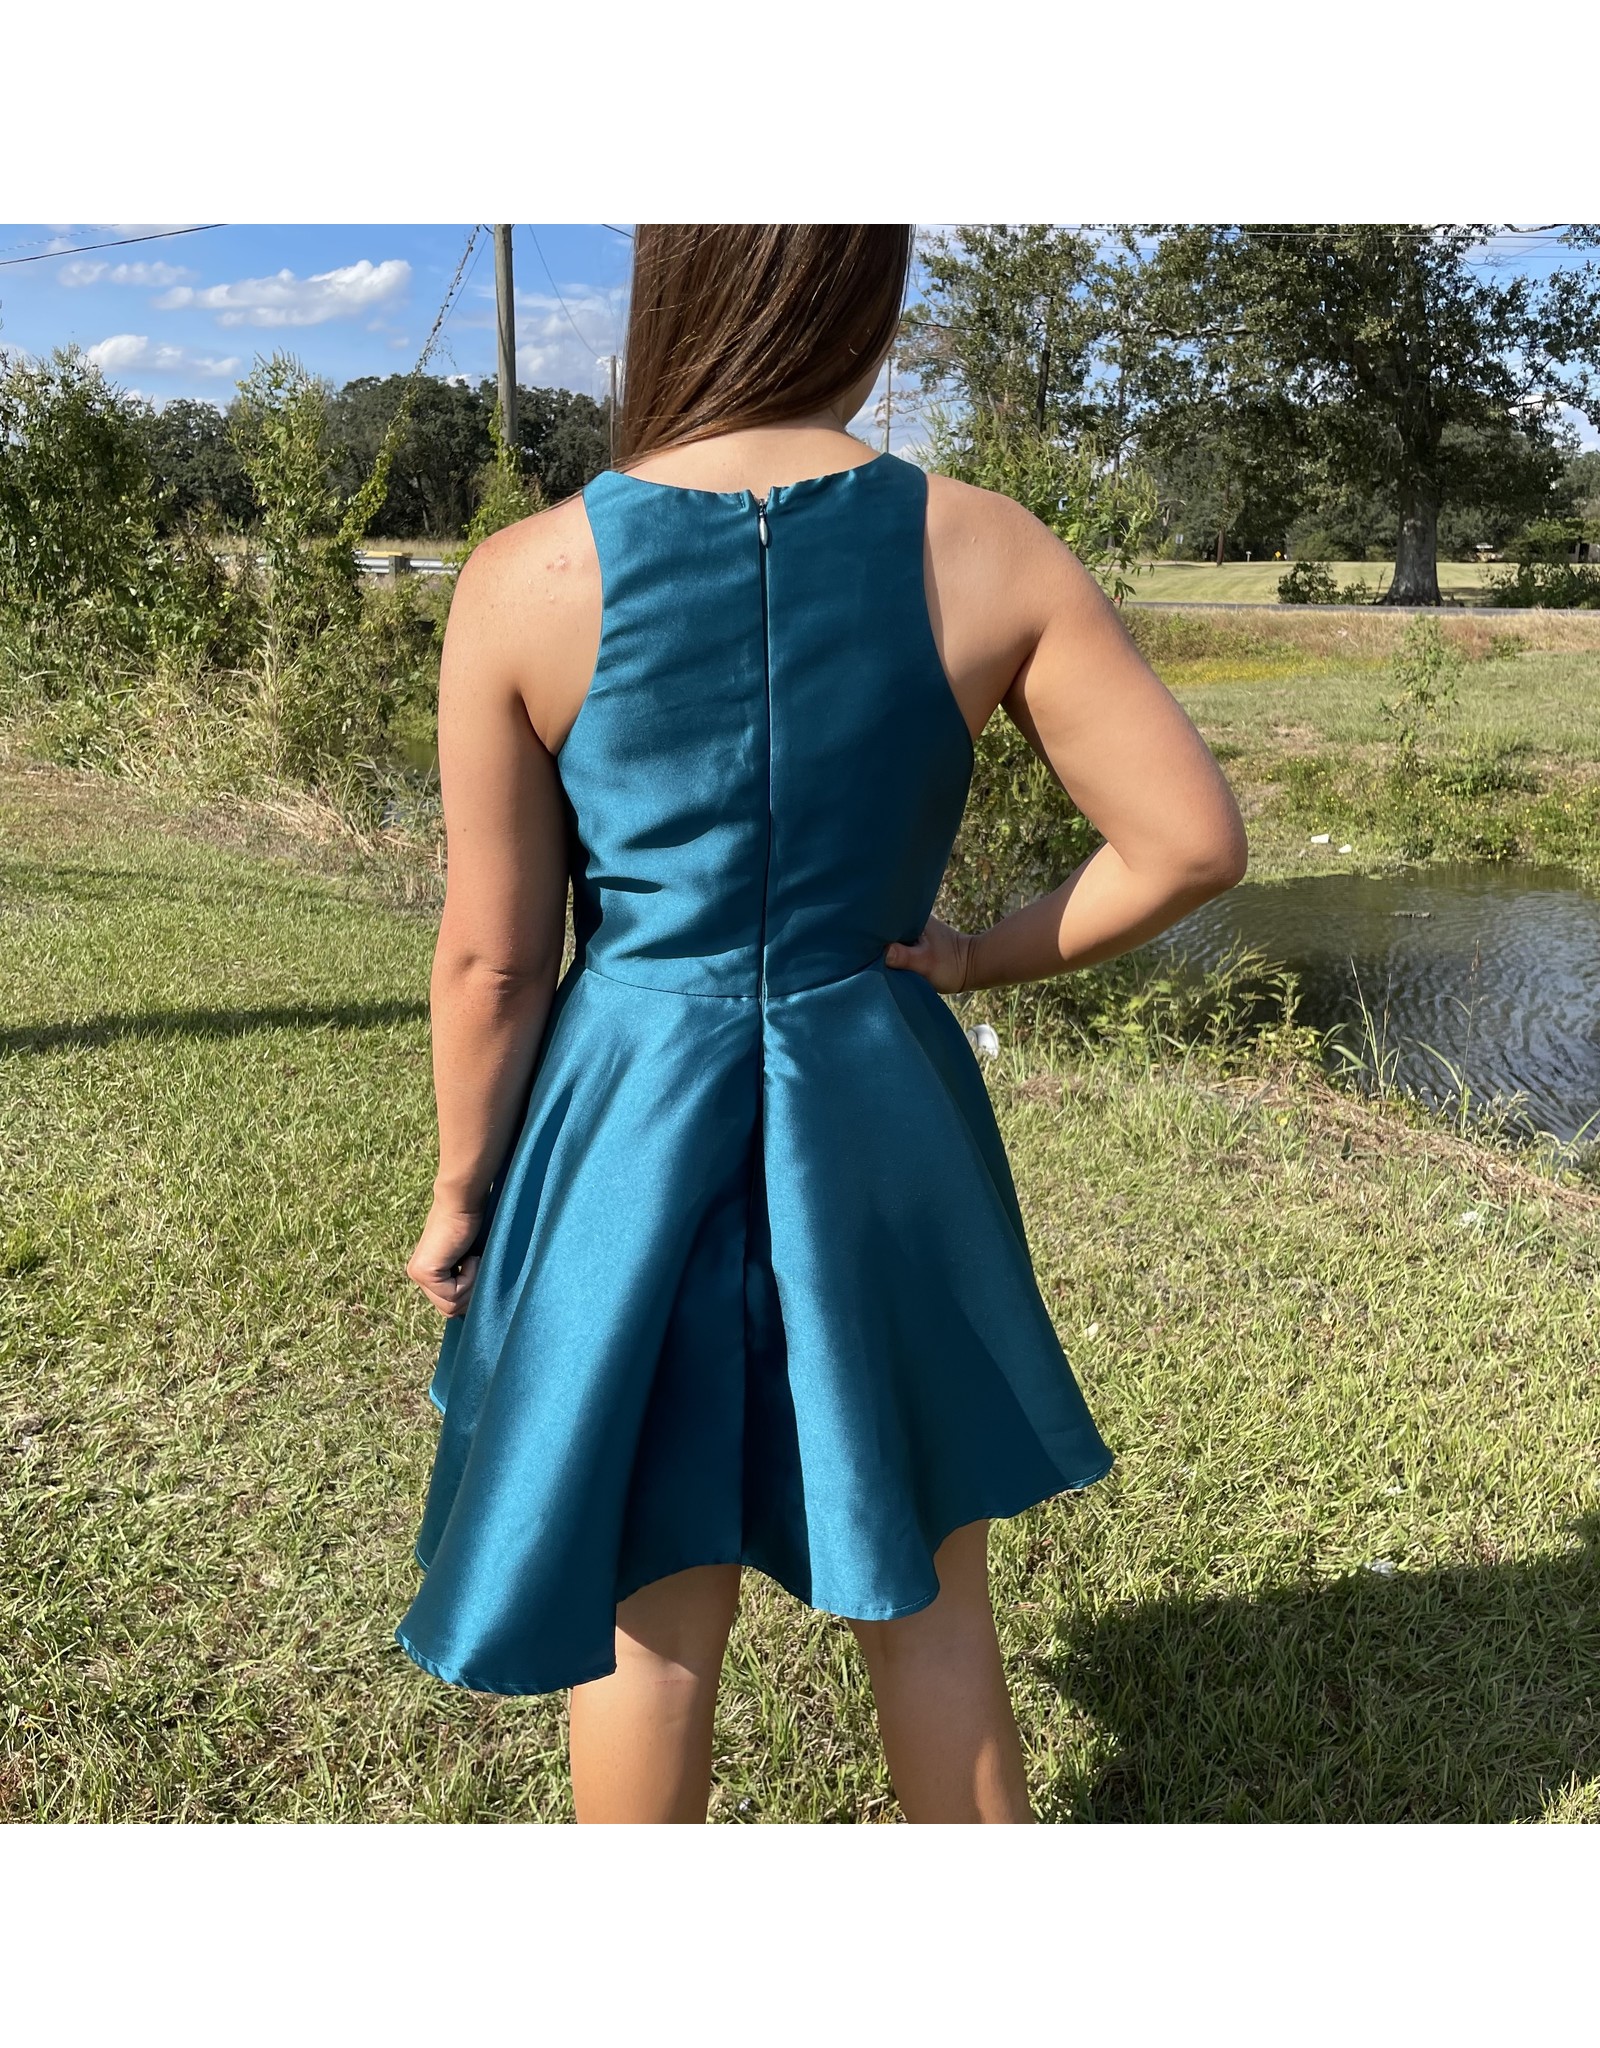 Teal Sleeveless Party Dress